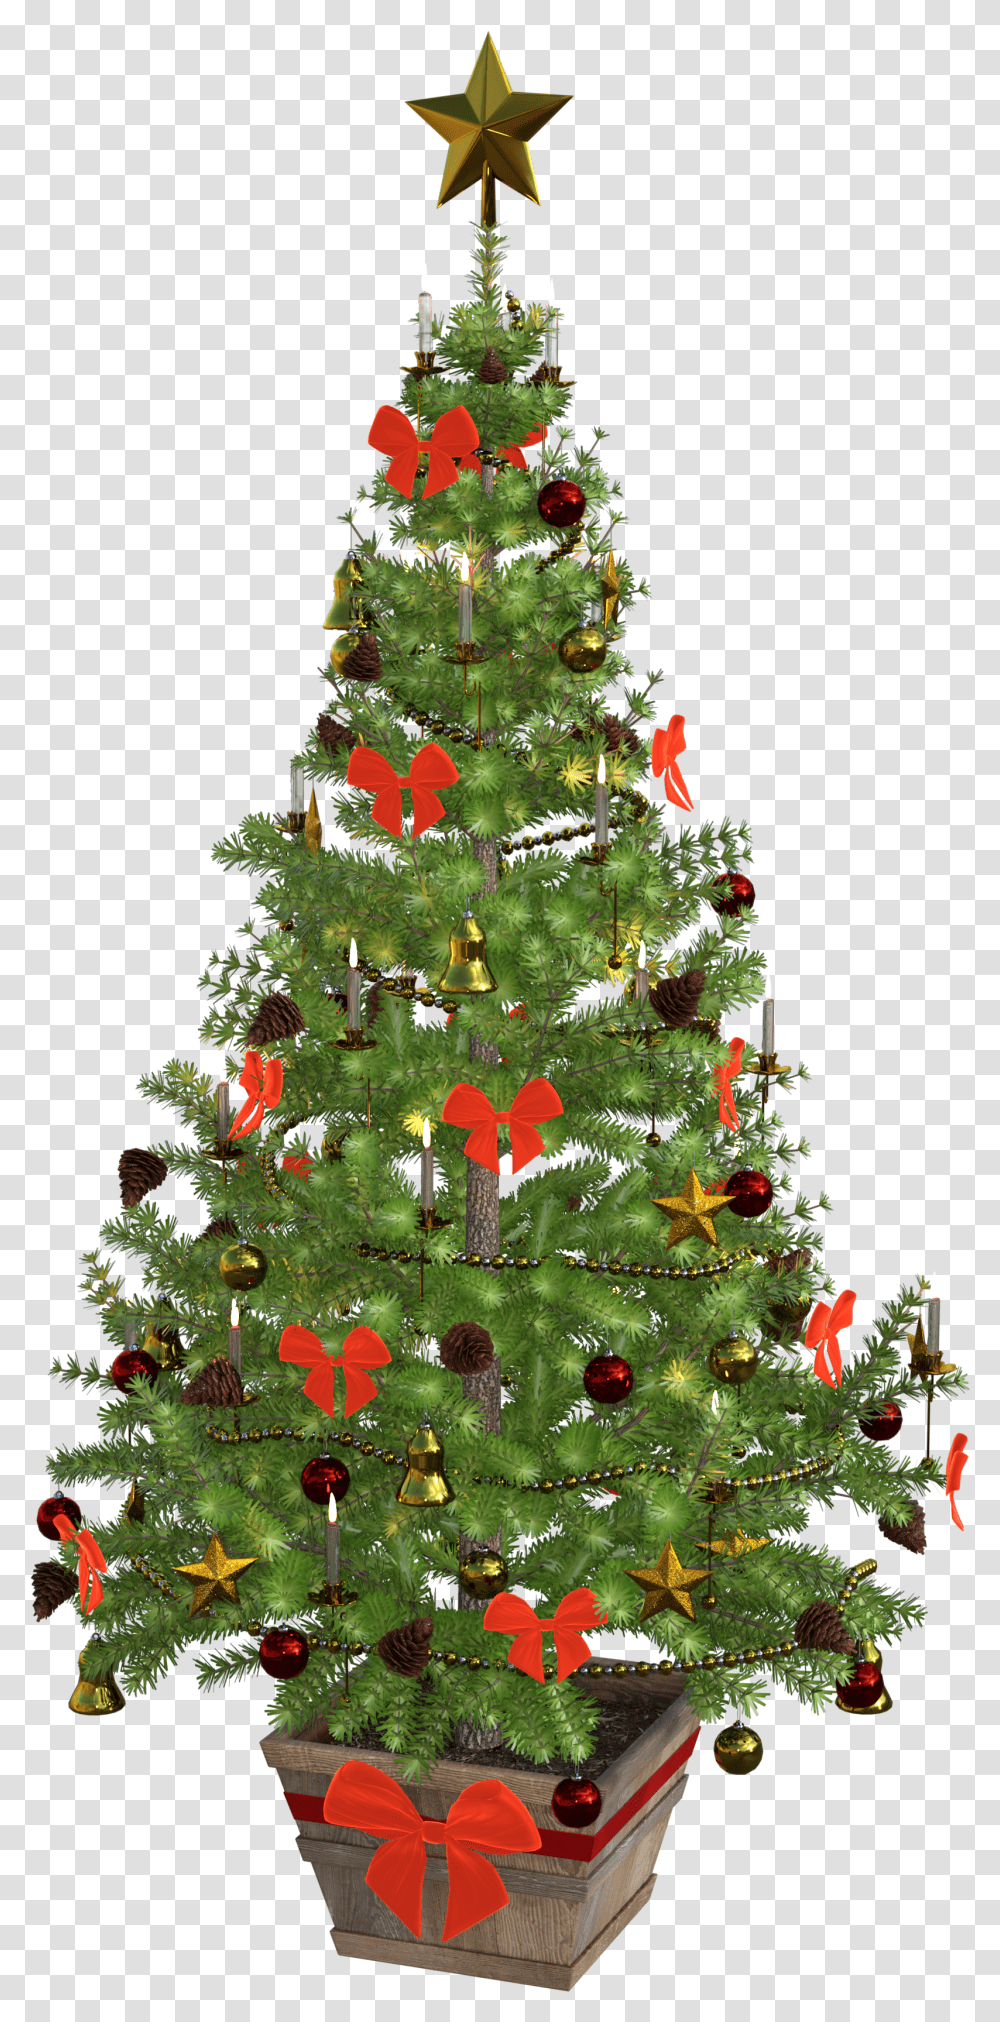 Christmas Tree Free Background Images Small Christmas Tree With Lights And Decorations Transparent Png